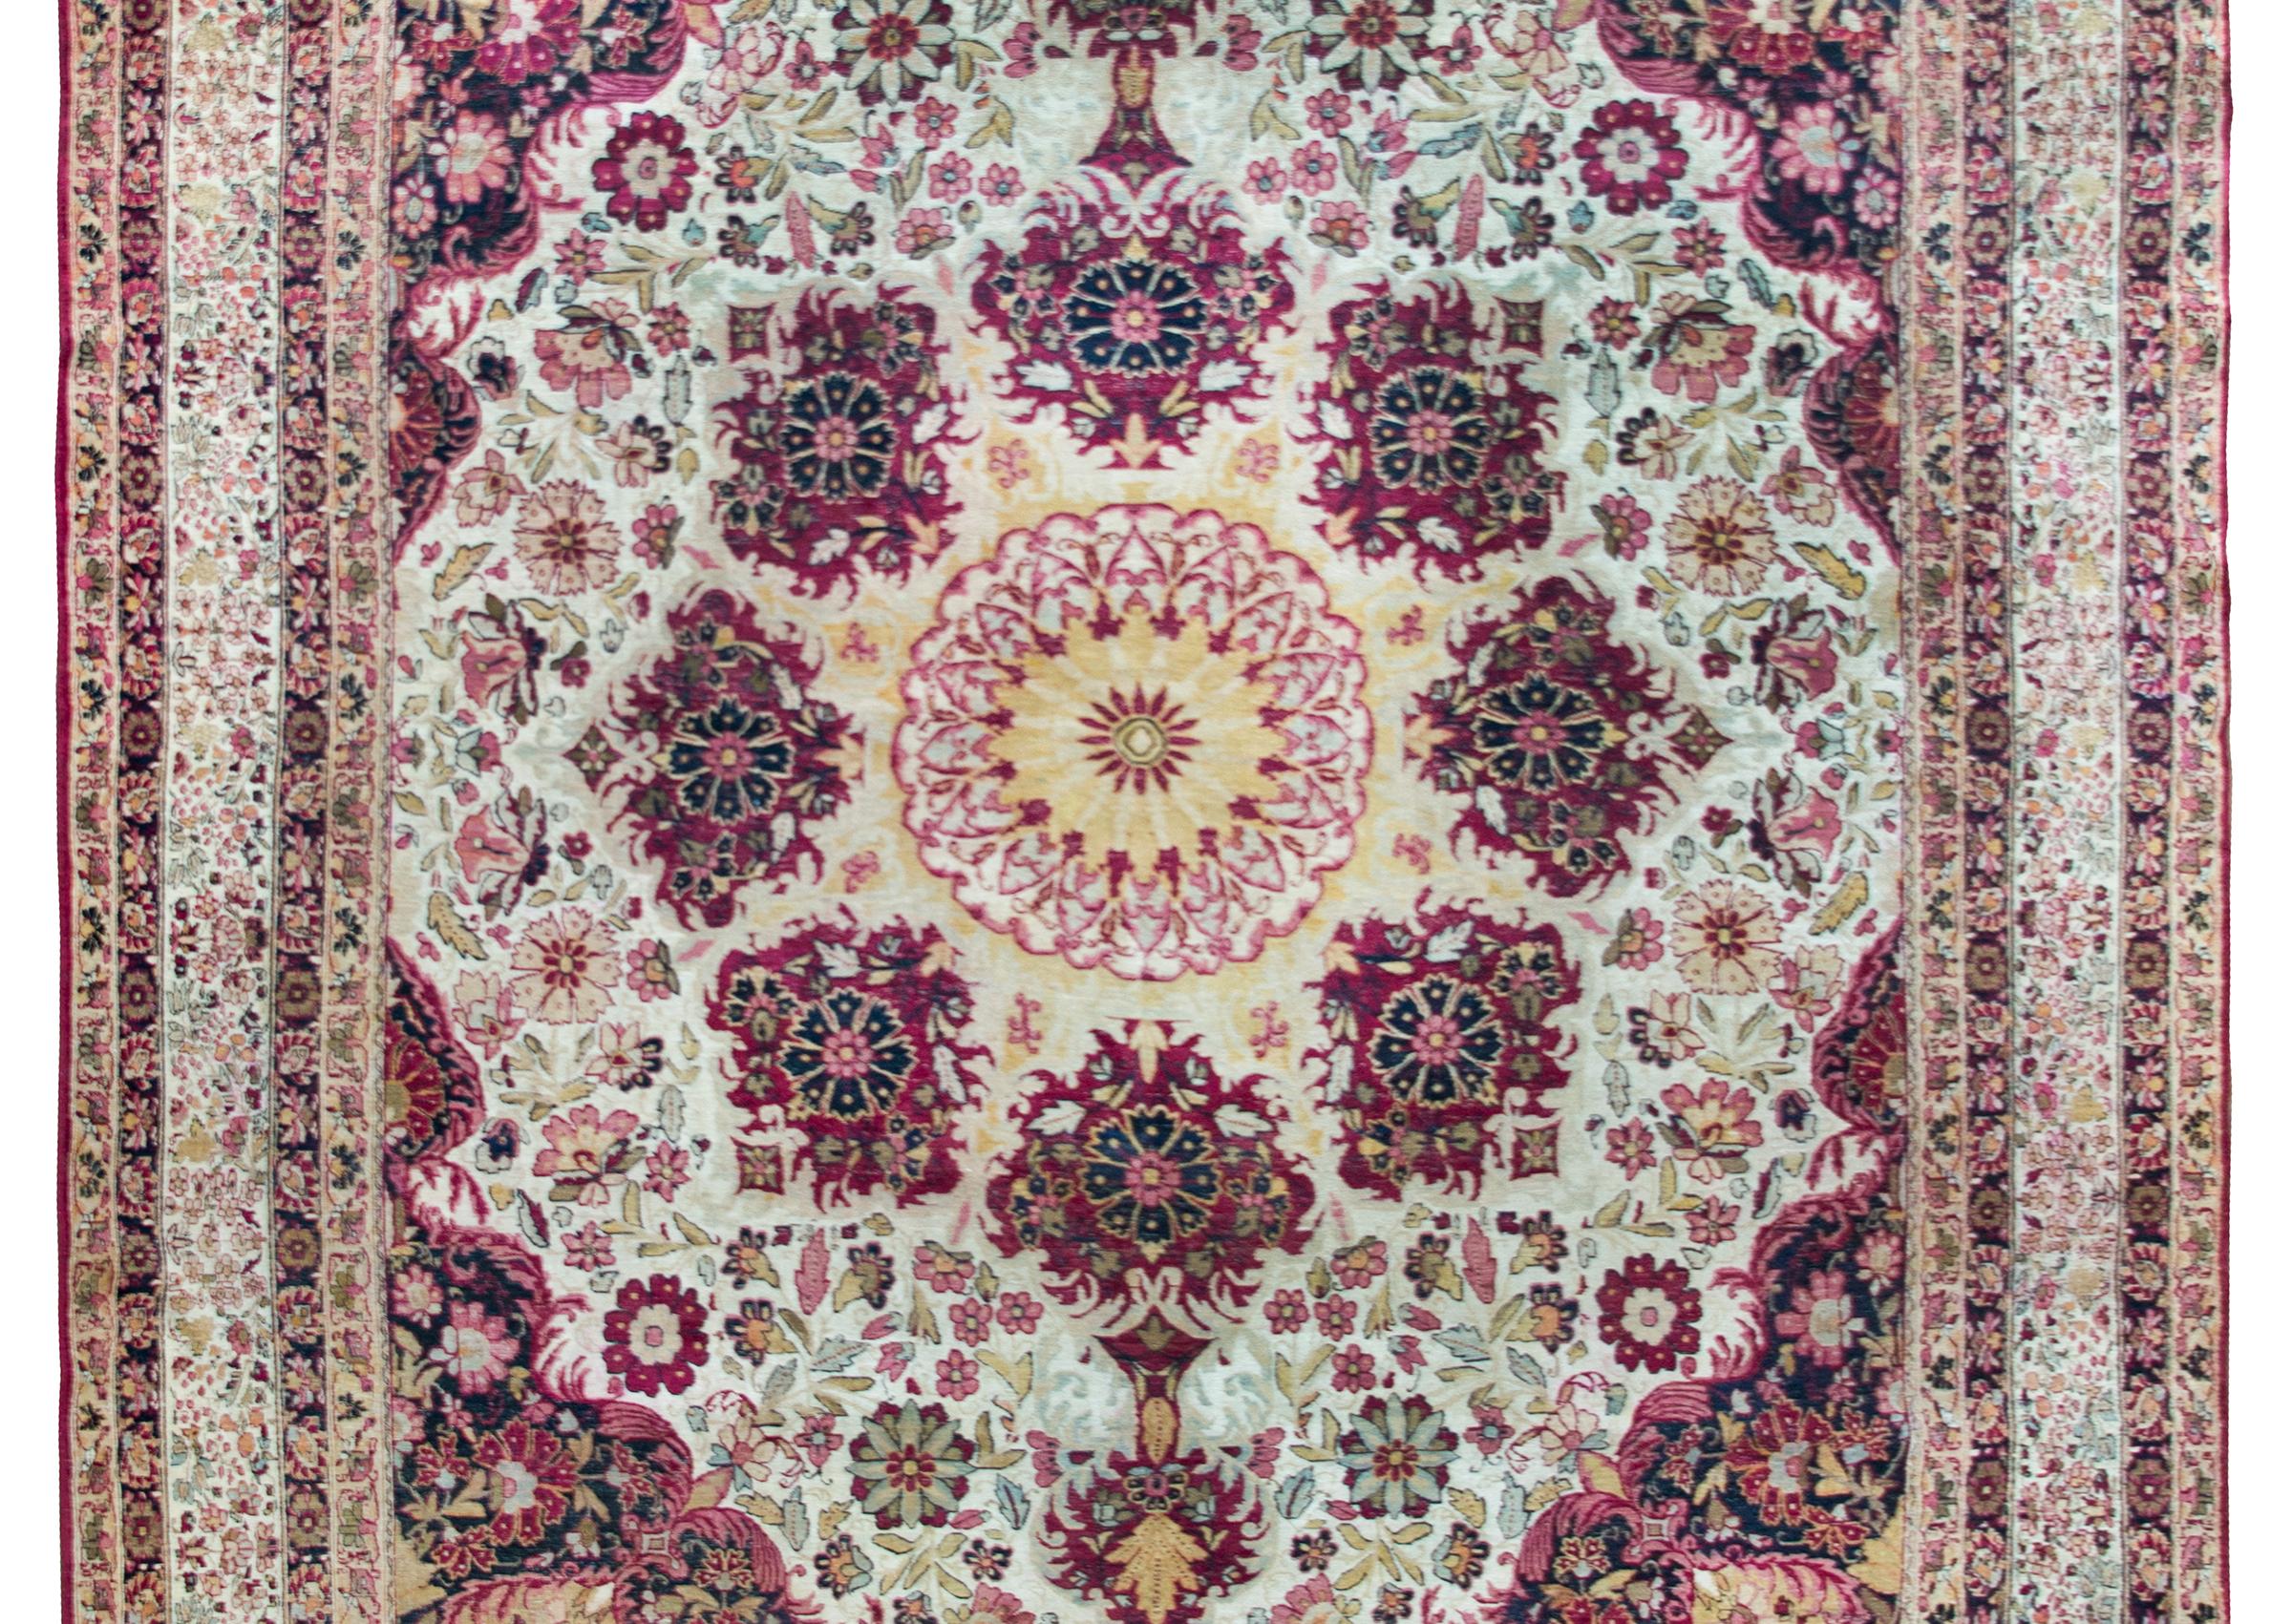 An early 20th century Persian Lavar Kirman rug with the most unique central medallion surrounded by eight individual floral medallions living amidst a field of more large and small scale flowers.  The border is complex with a wide central intensely